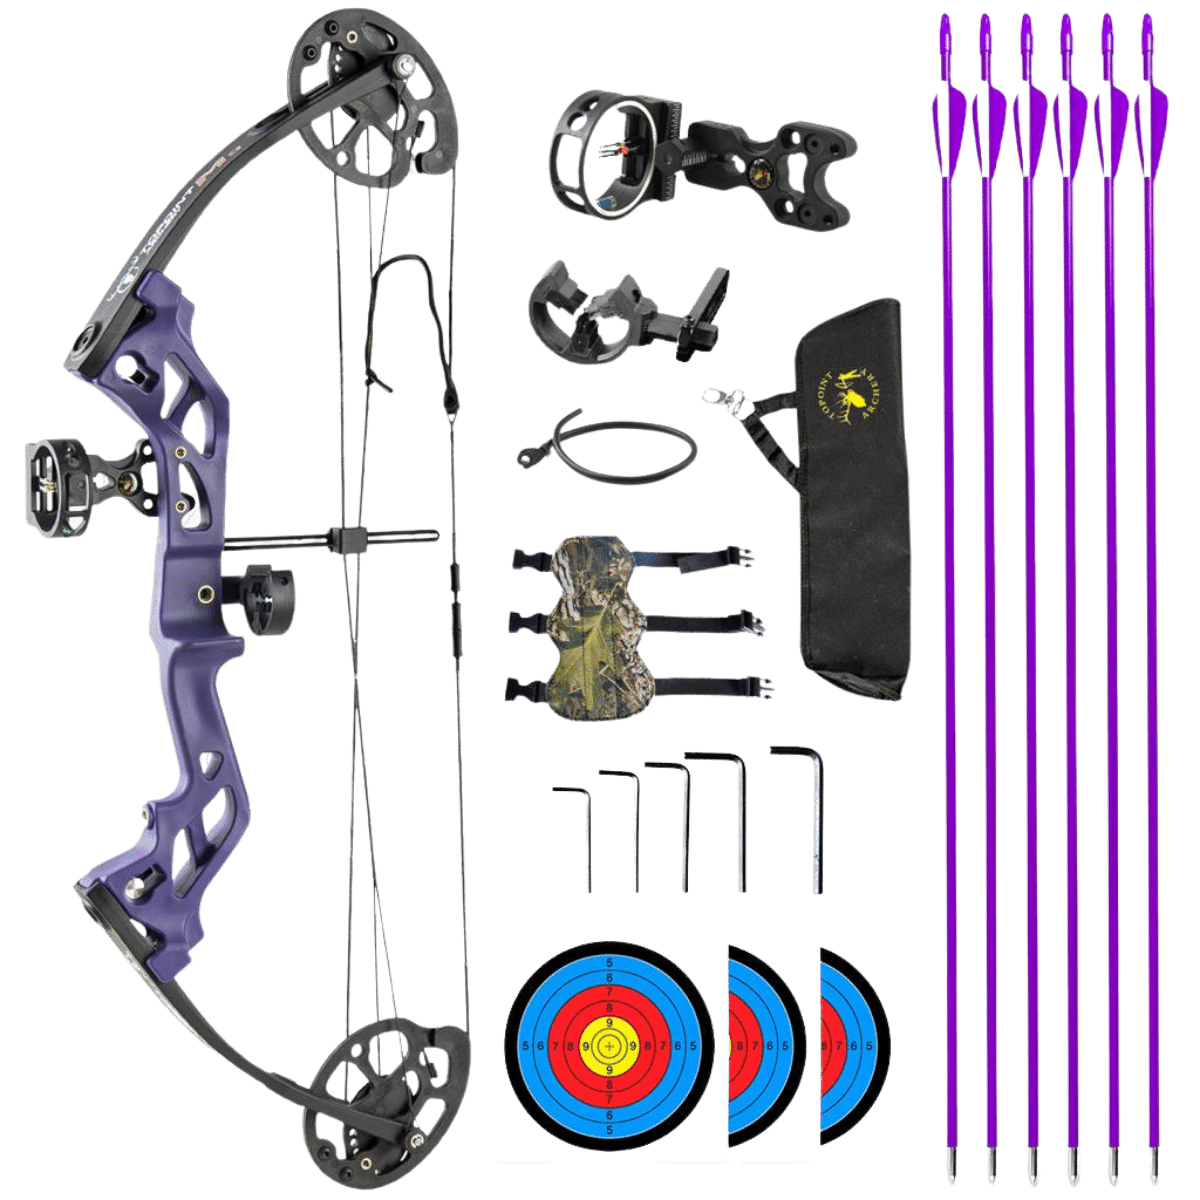 Topoint Archery Compound Bow Package M3 10-30LBS RH 17-27" 75% LET-OFF - Fast UK Shipping | Tactical Archery UK